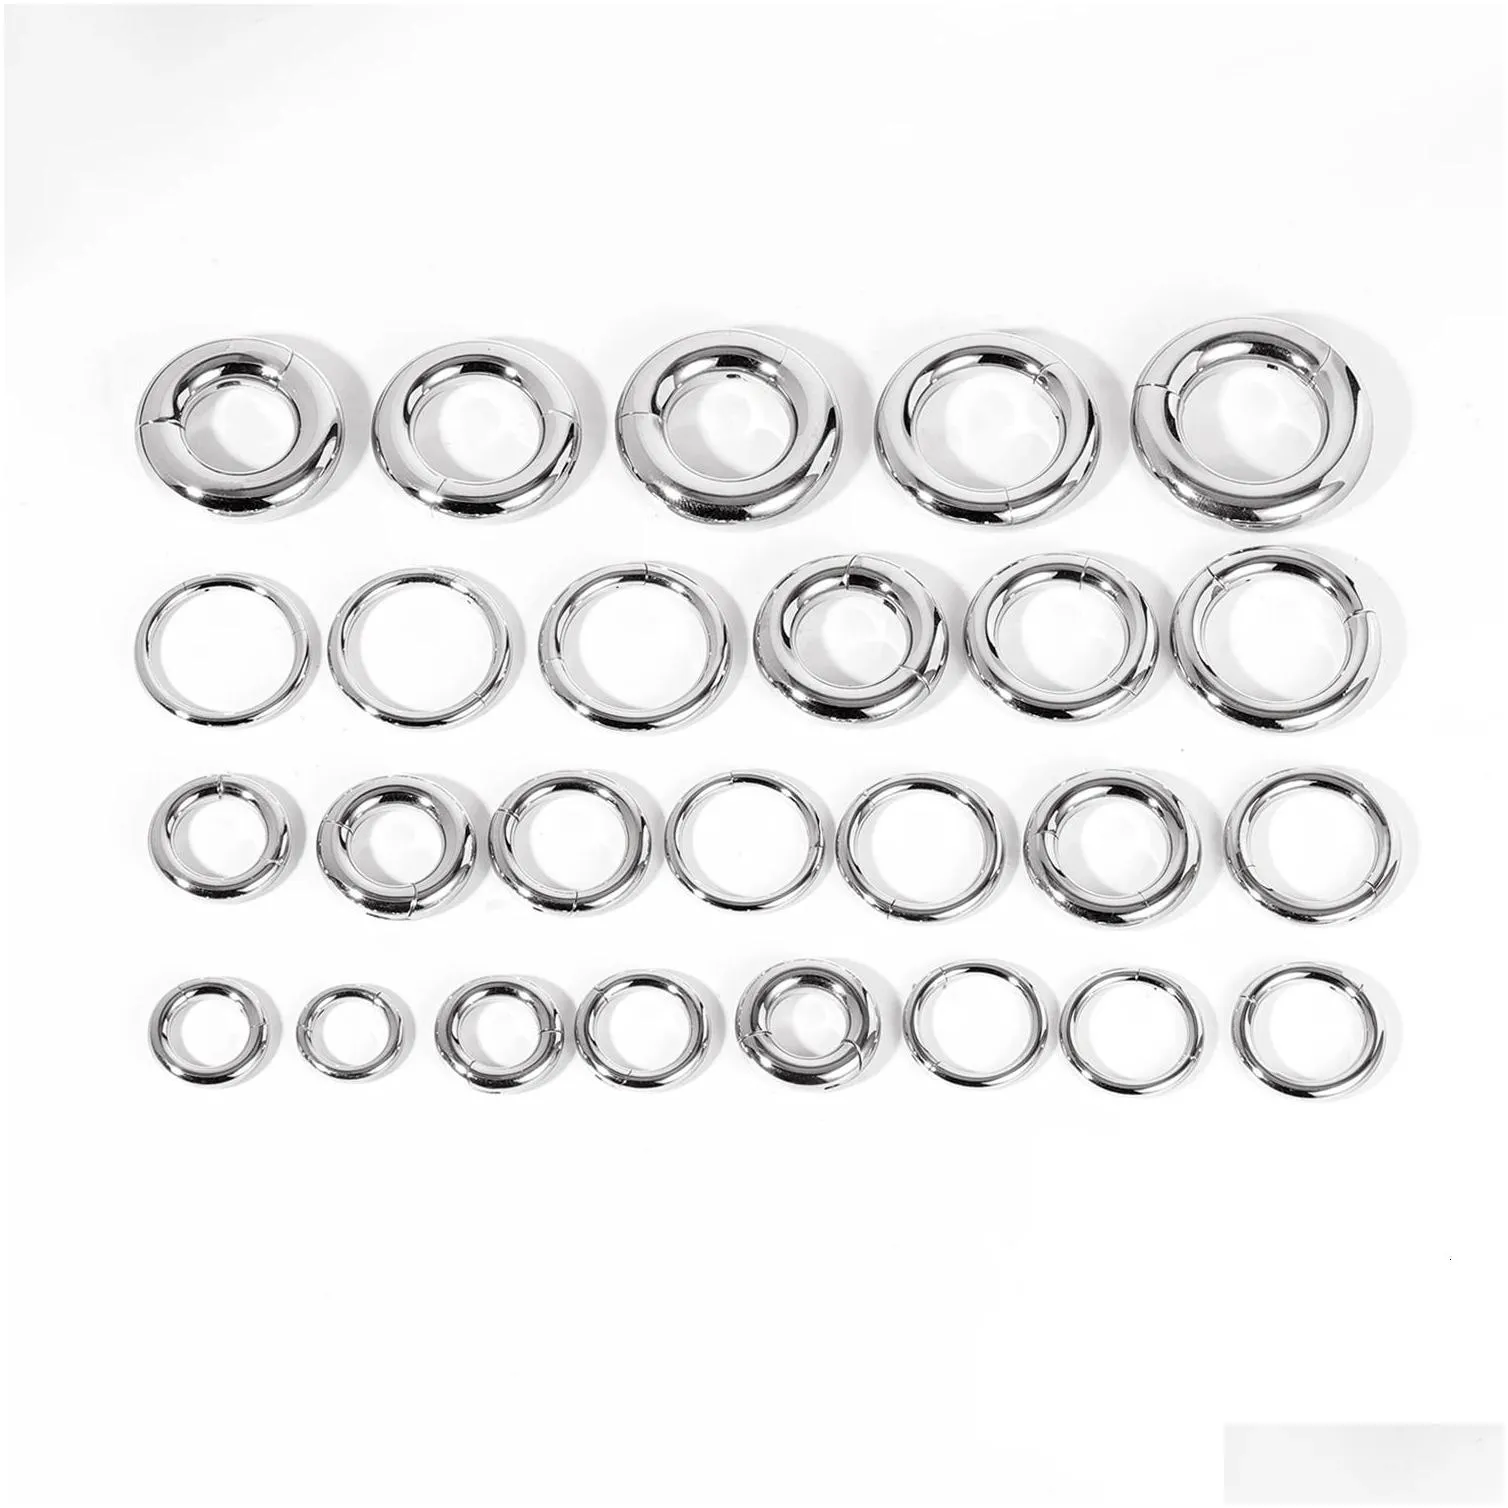 Nose Rings & Studs Zs 1Pc Large Size Hoop Earring 316L Stainless Steel Ear Gauges Plugs Punk Septum 24681012G Bcr Body Piercings 2401 Dh1N7